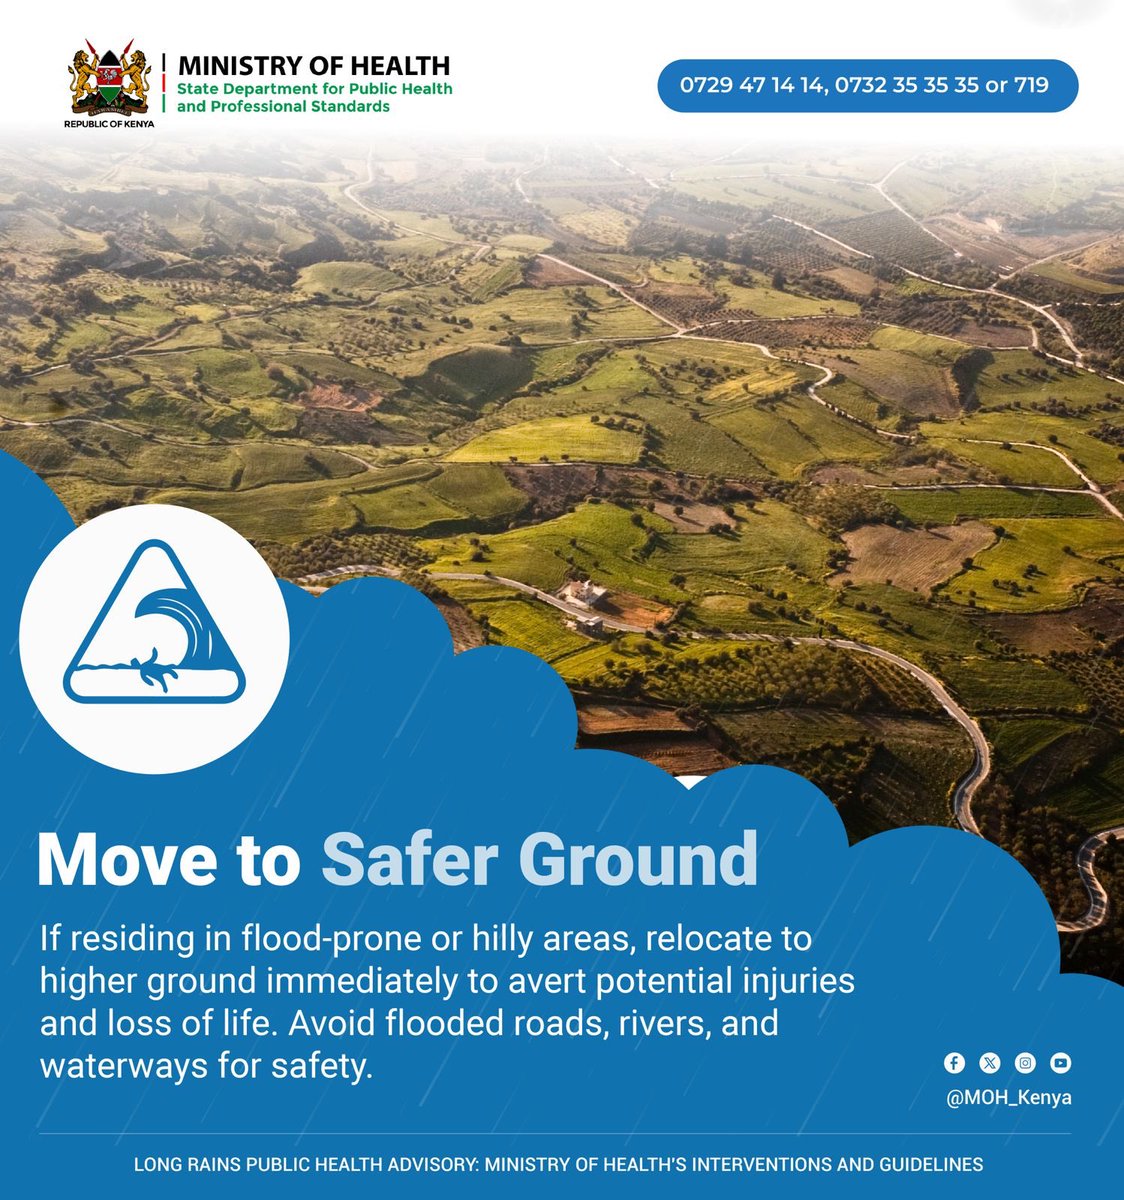 Please heed this advisory from the government @SpokespersonGoK. Kenyans are strongly advised to steer clear of mudslide-prone regions, particularly in Central Kenya and Narok Counties. Additionally, sand harvesting has been prohibited in Kerio Valley.